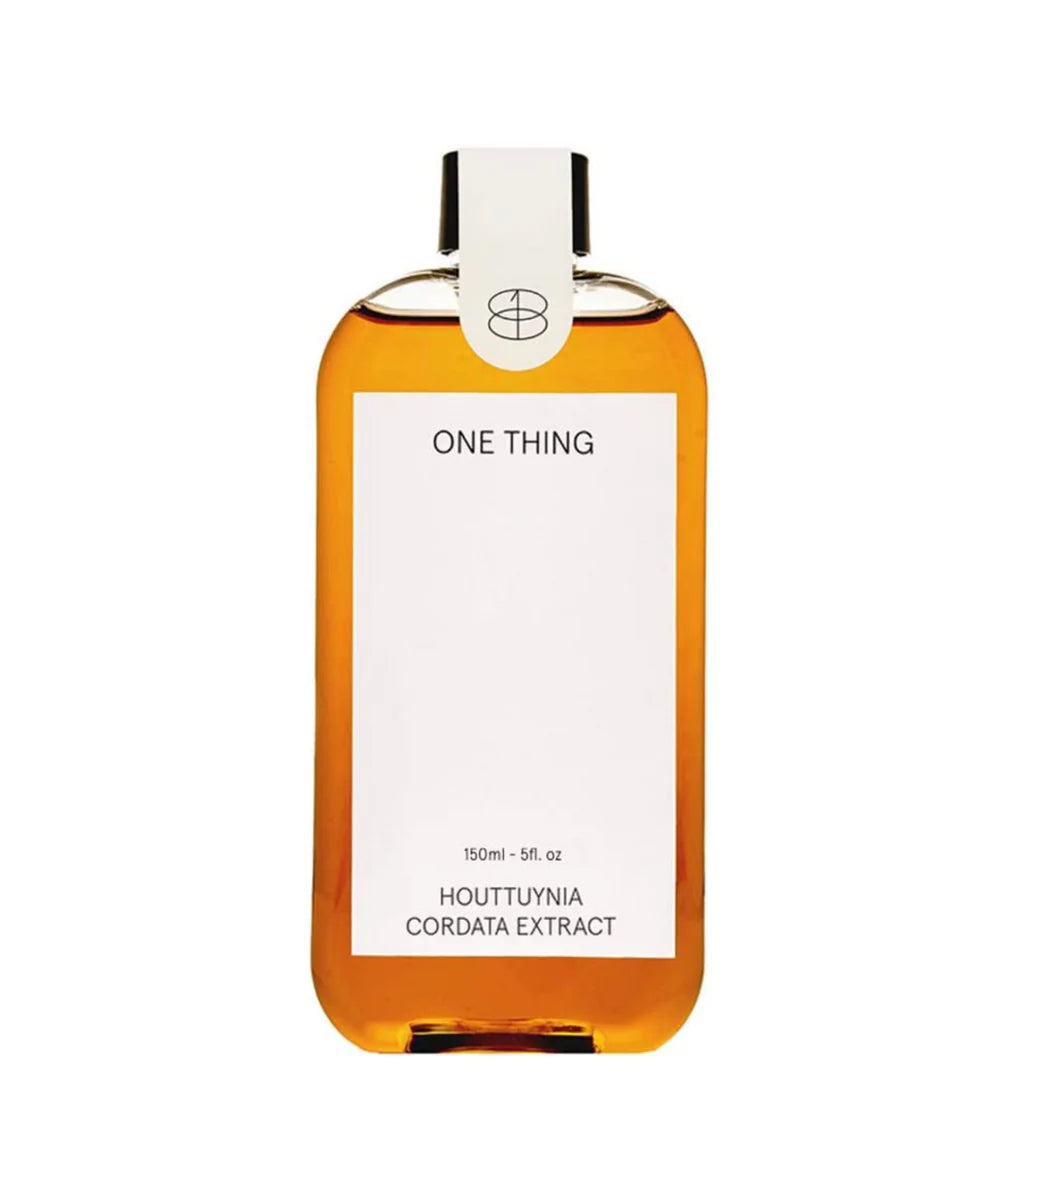 ONE THING - Houttuynia Cordata Extract